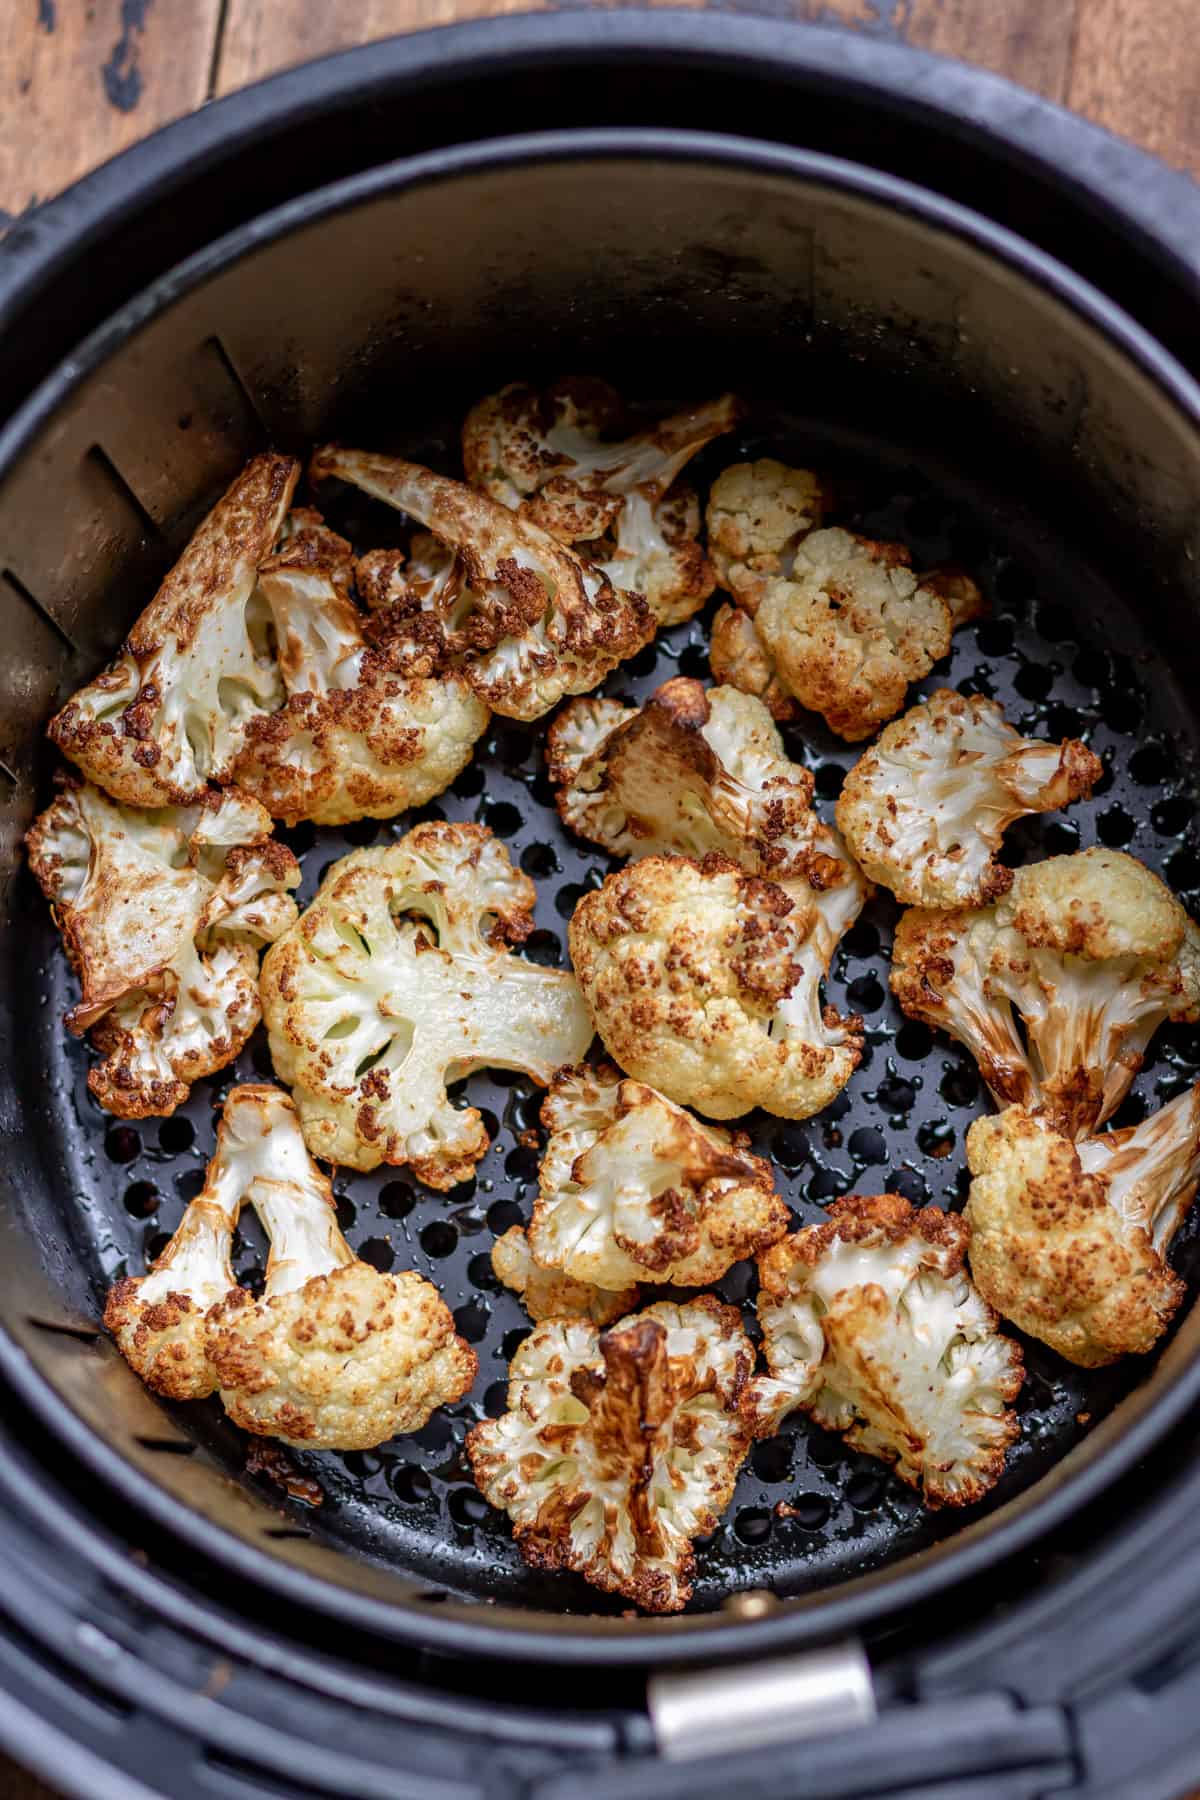 Cooked cauliflower in an air fryer.